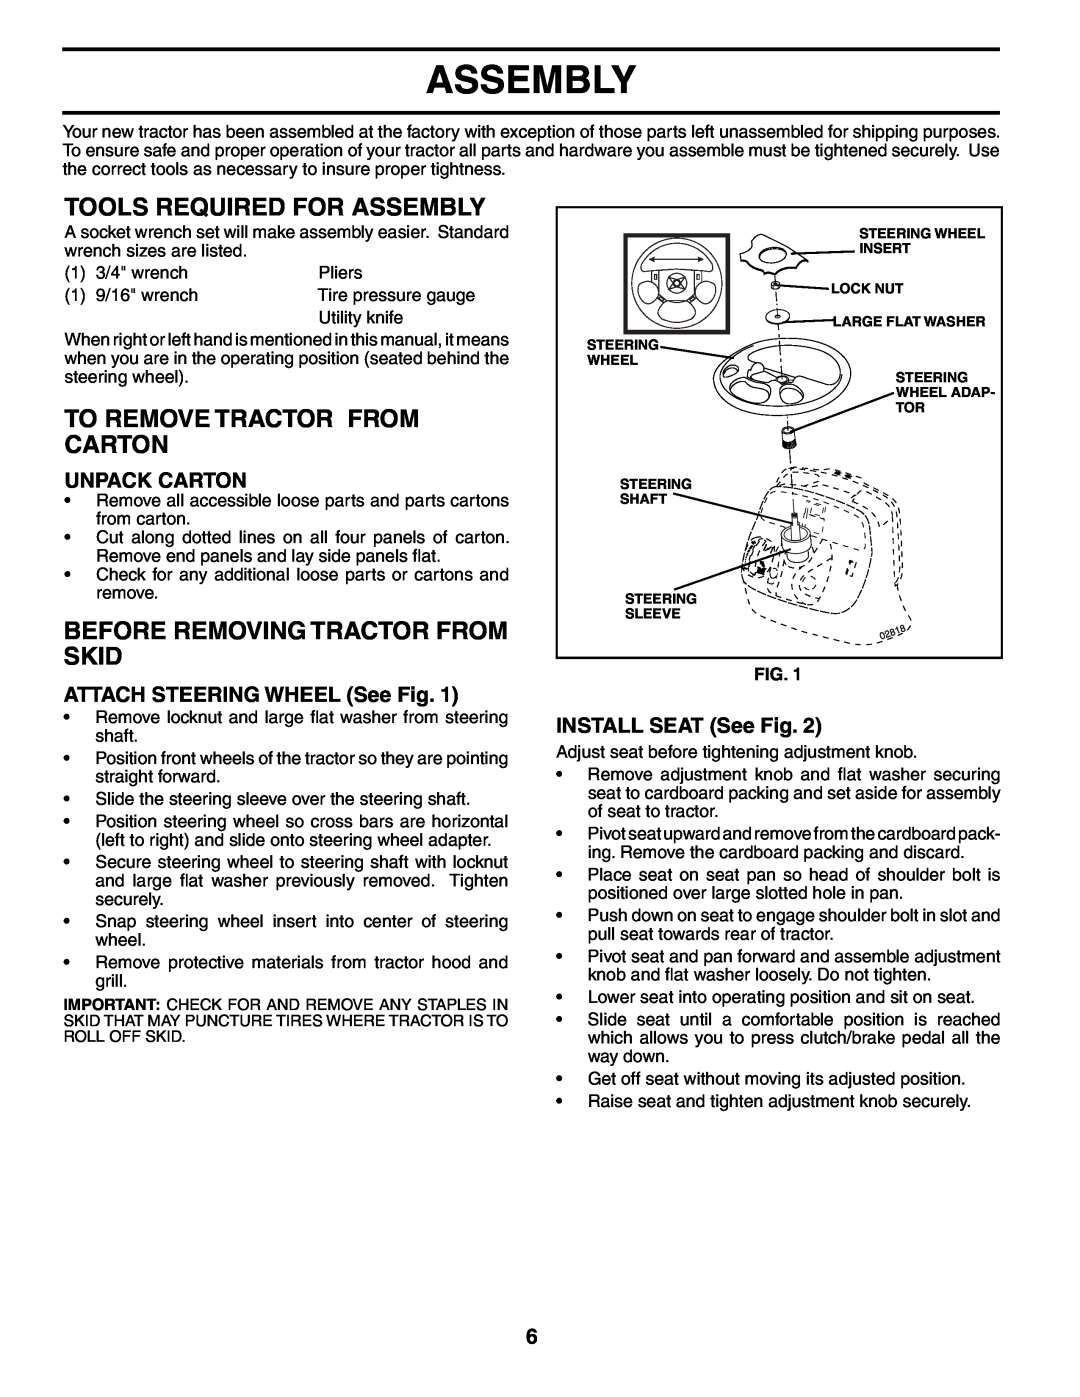 Poulan XT24H42YT manual Tools Required For Assembly, To Remove Tractor From Carton, Before Removing Tractor From Skid 